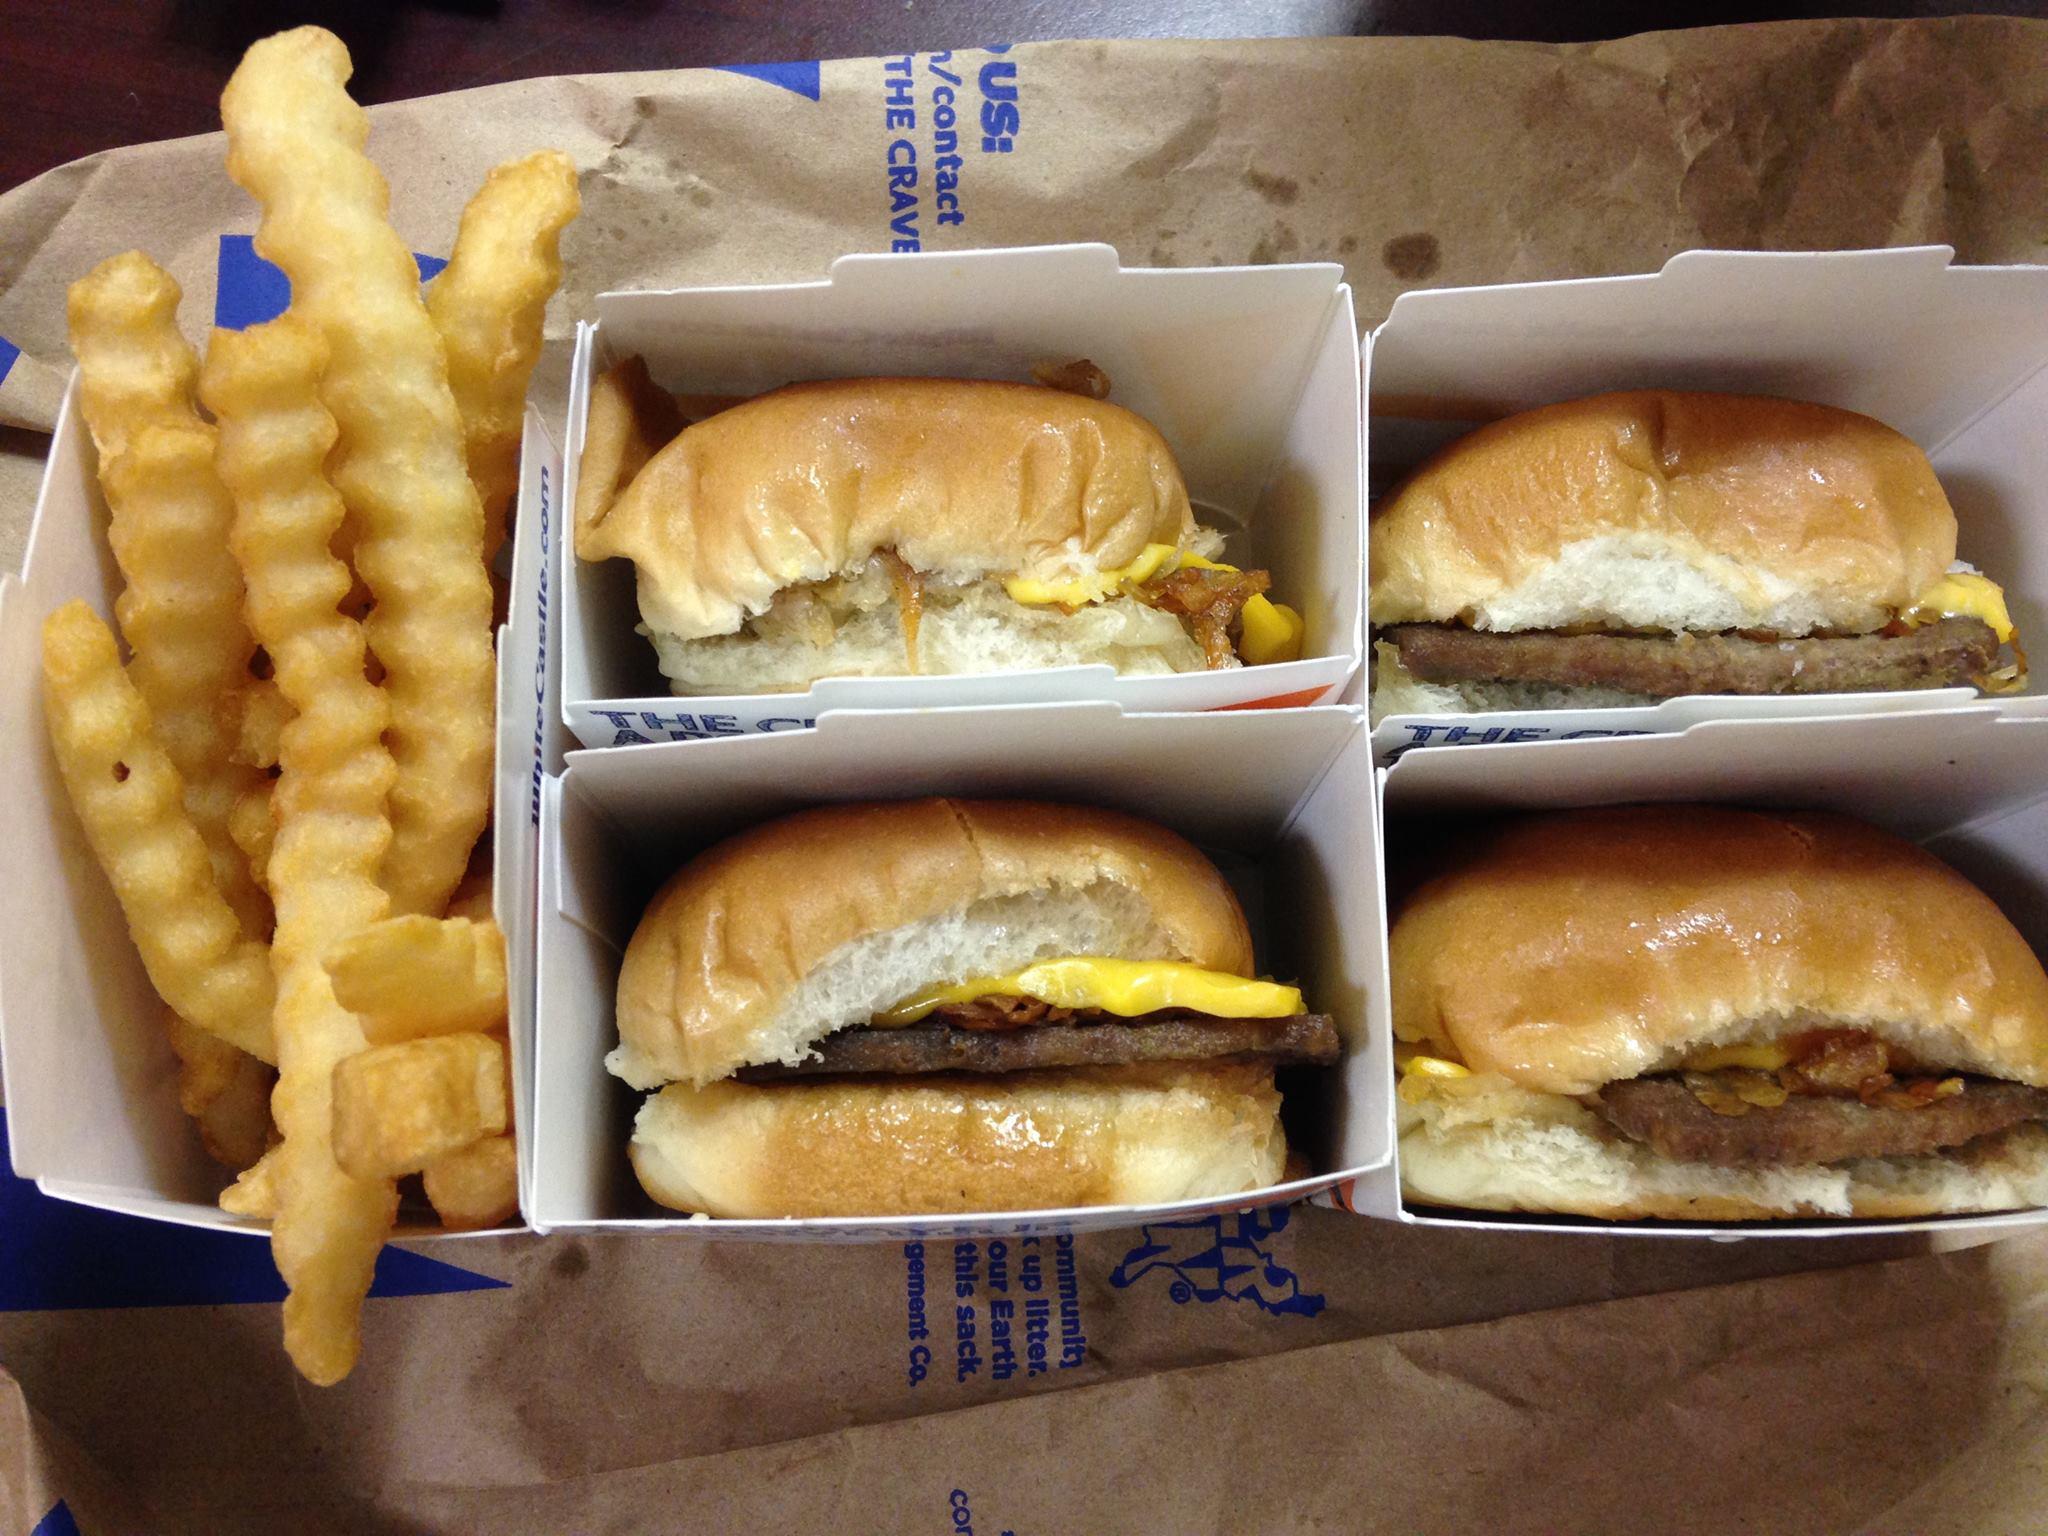 South Floridians' Outcry For White Castle Has Been Heard | WLRN